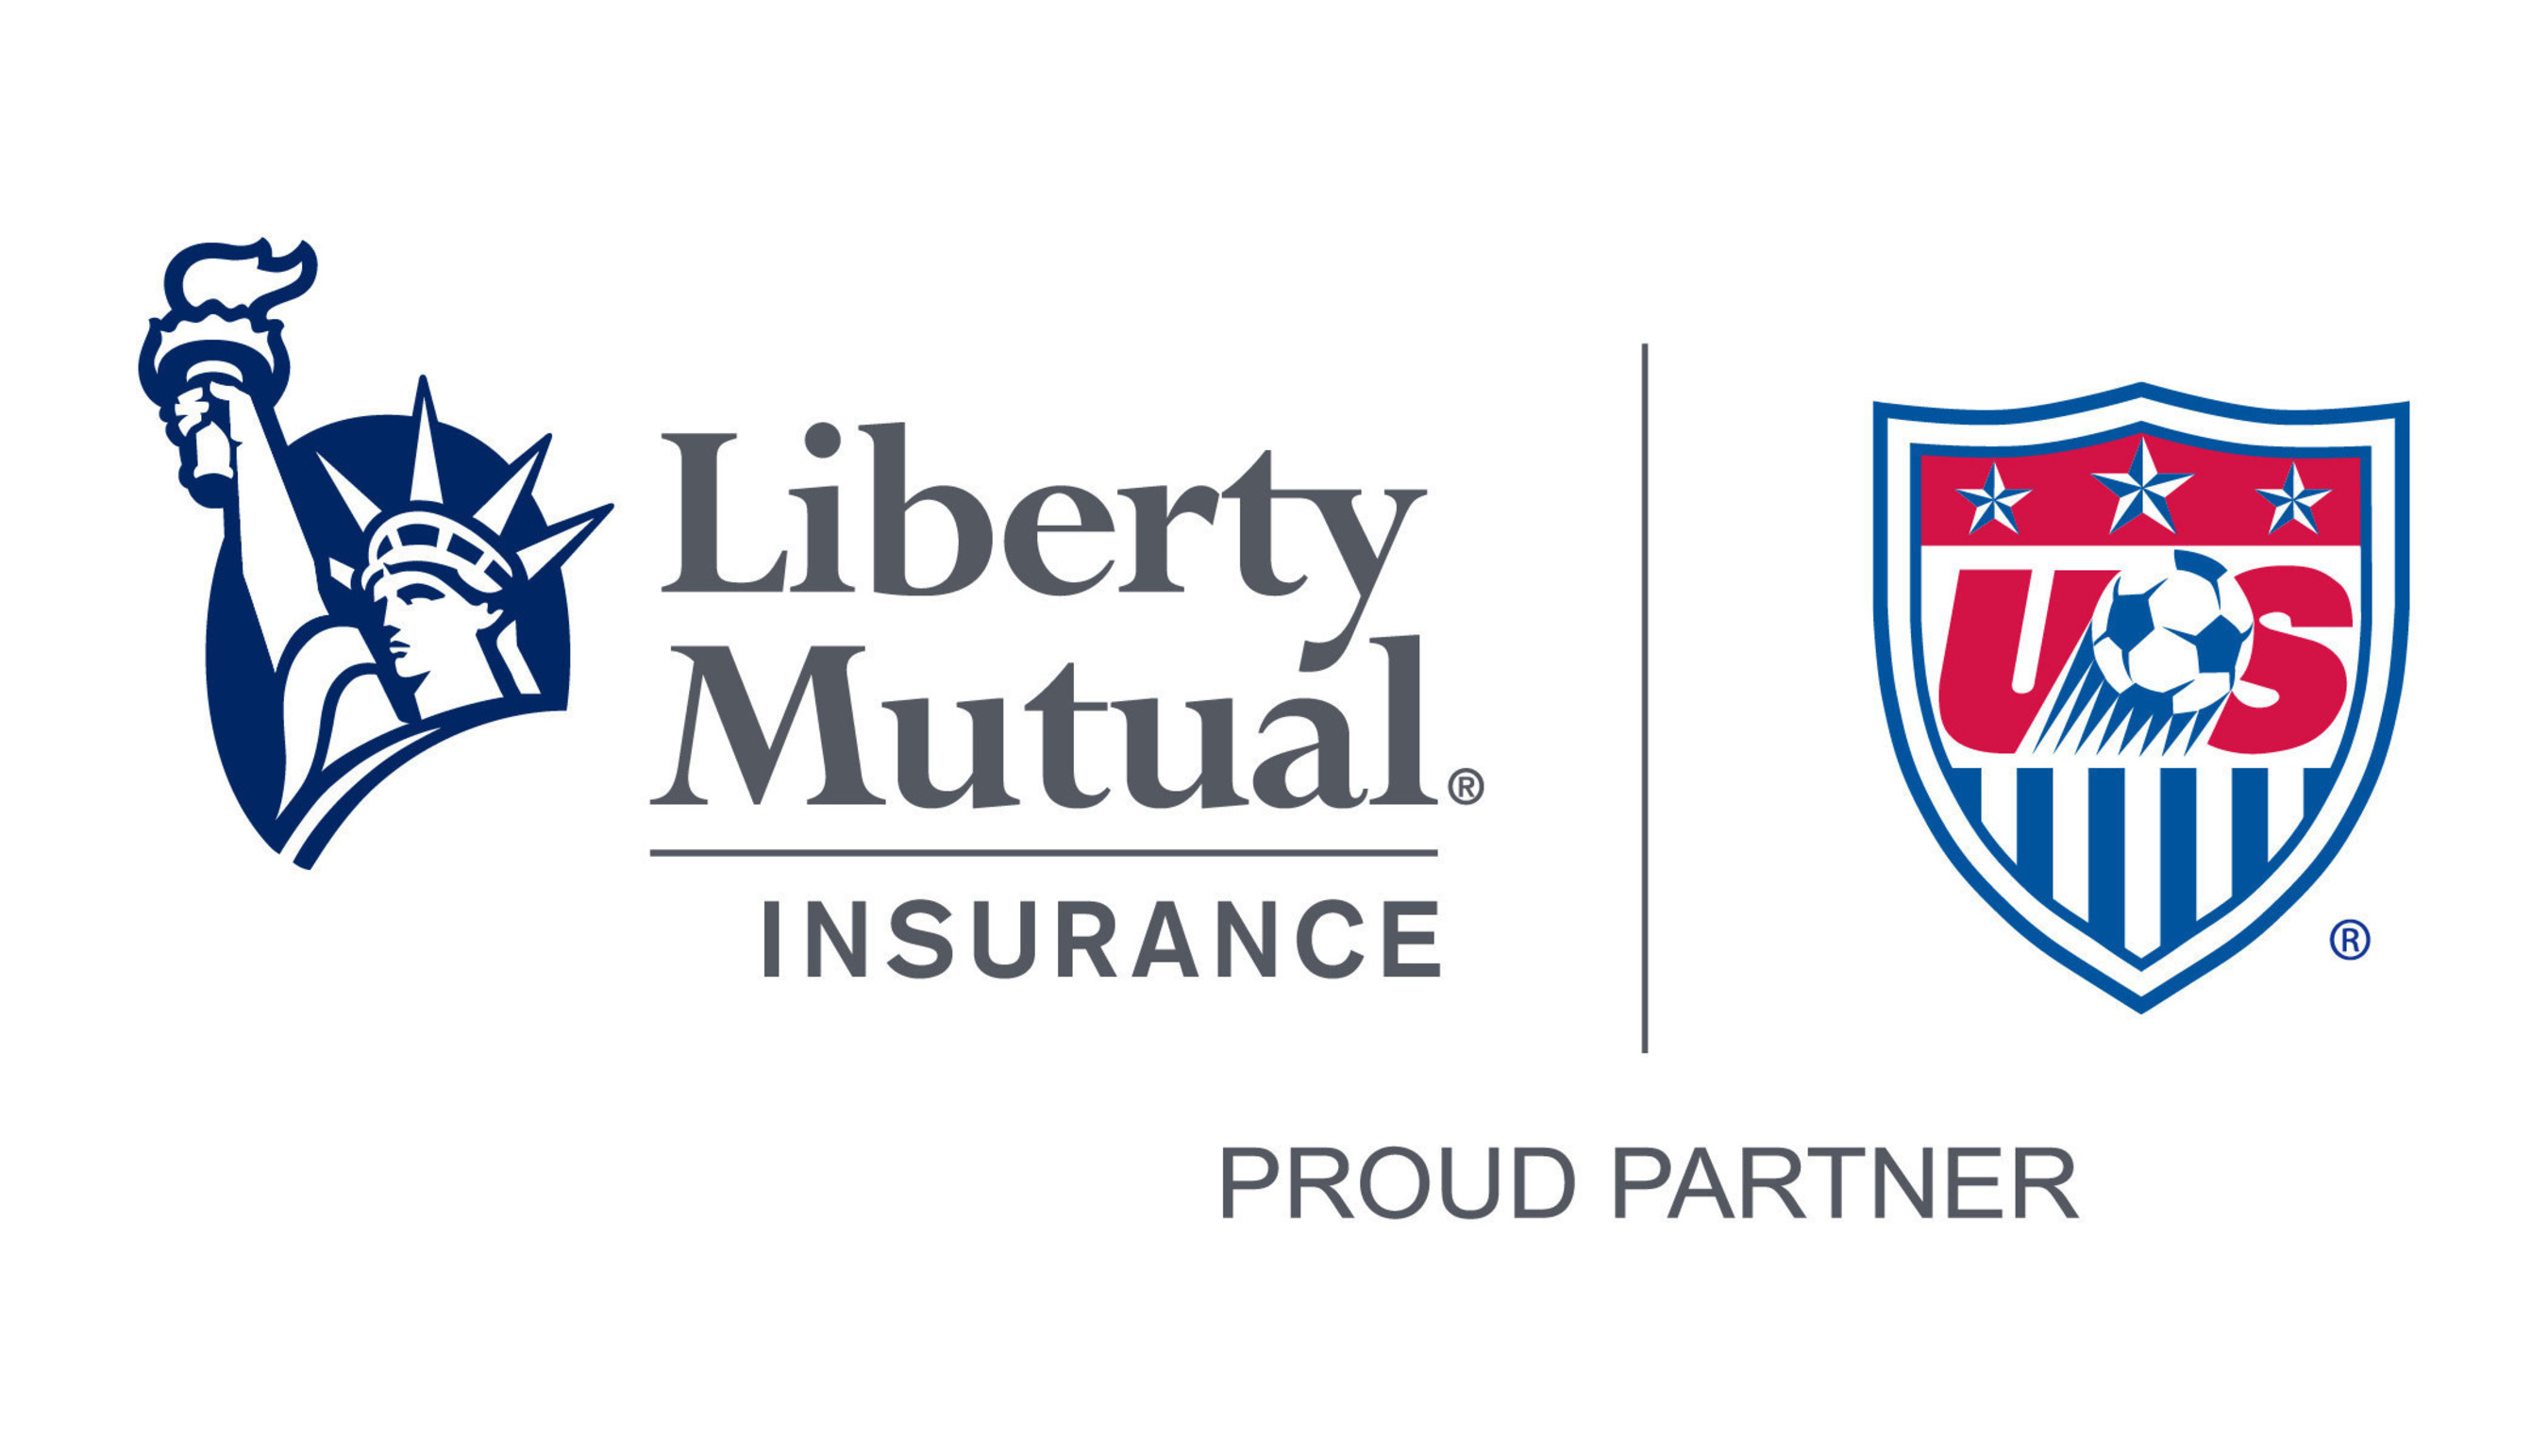 Liberty Mutual Insurance today launched its new partnership as the Official Insurance Sponsor of US Soccer.